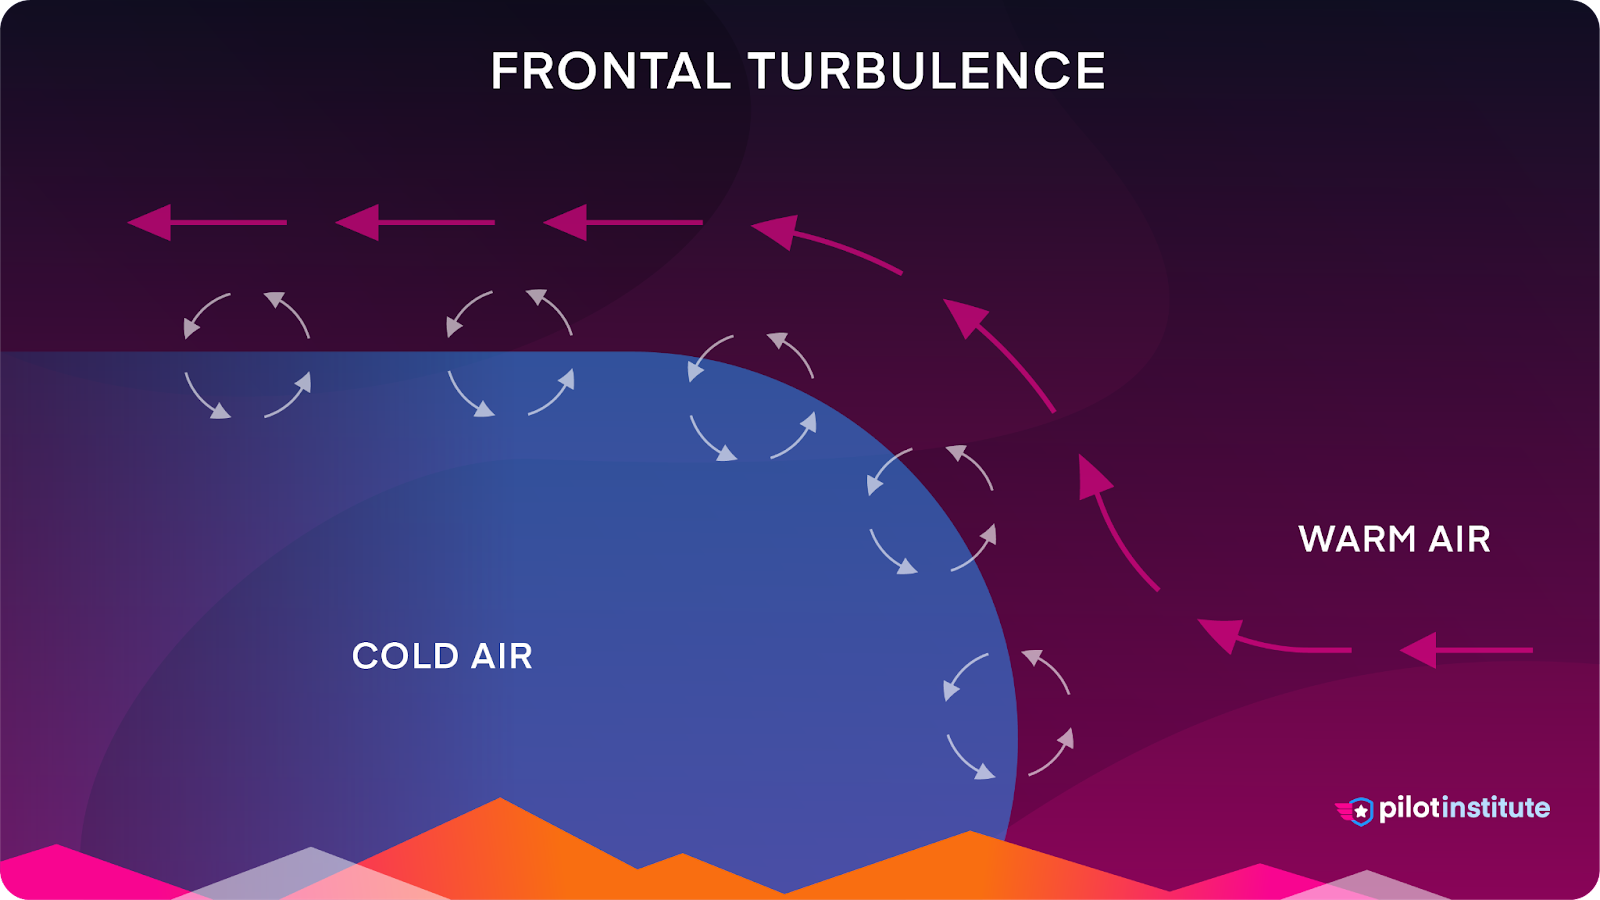 A diagram showing frontal turbulence.